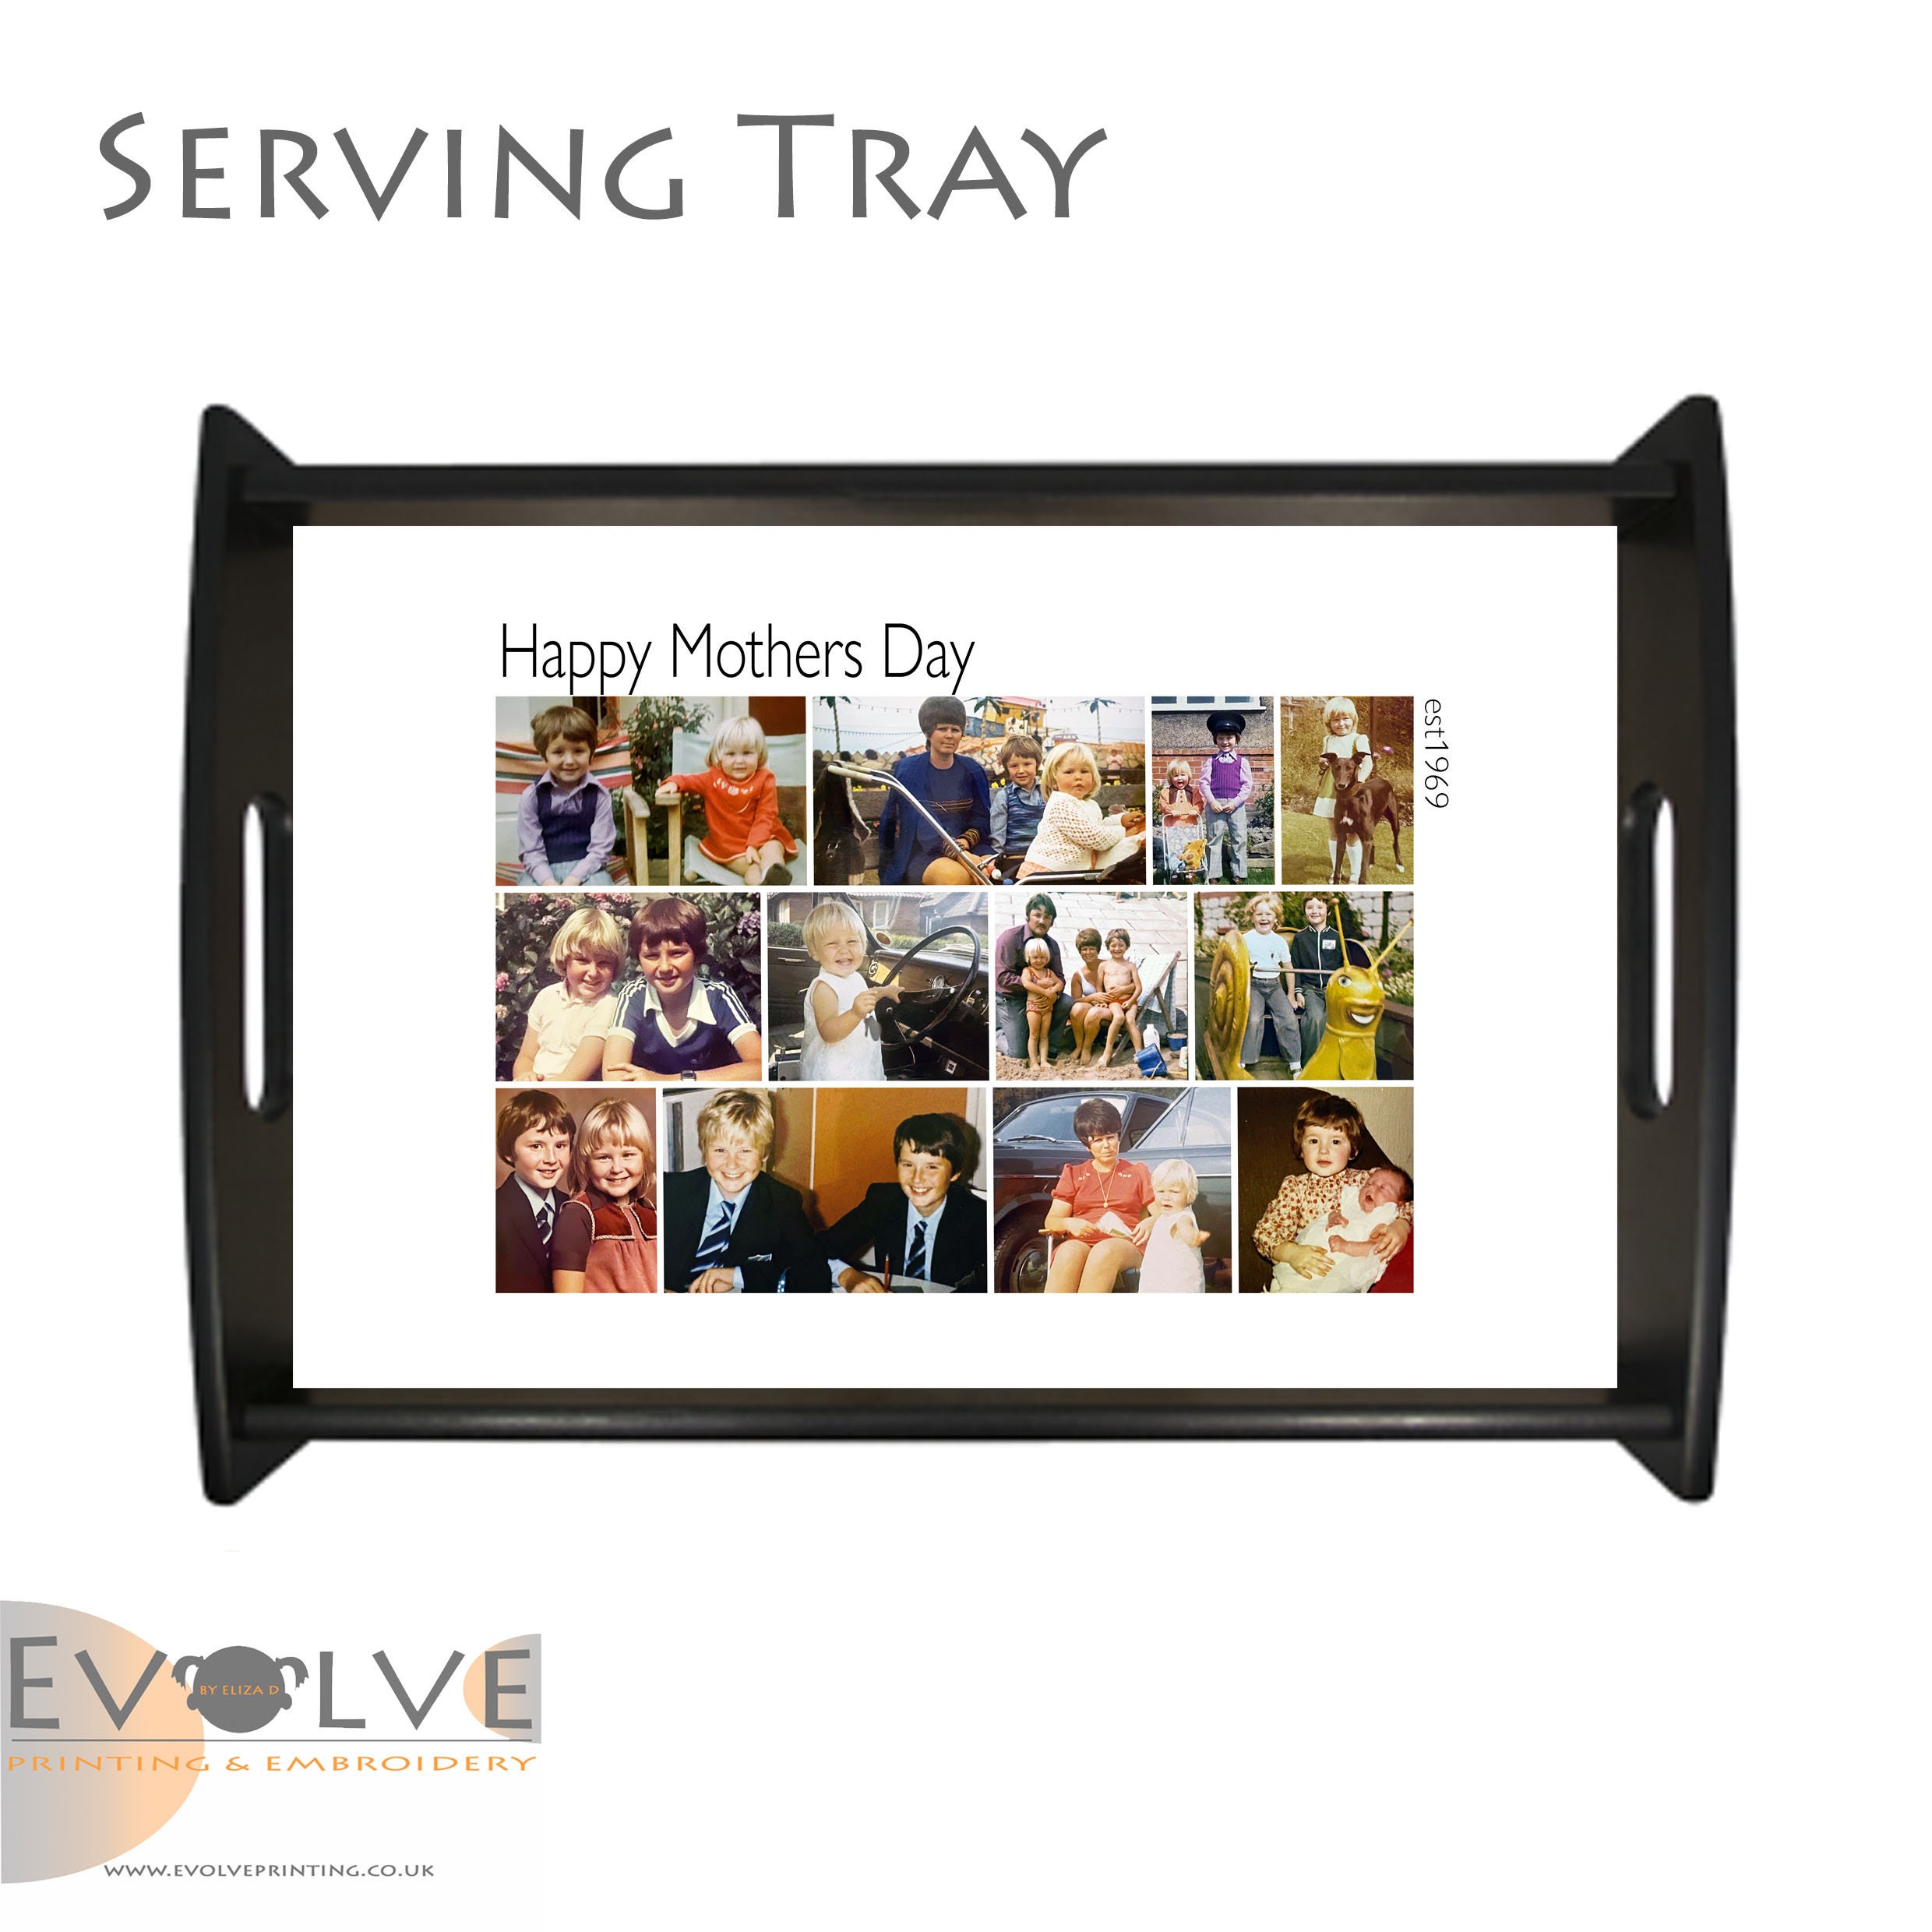 Personalised Photo Serving Tray, Custom for Mothers Day or Any